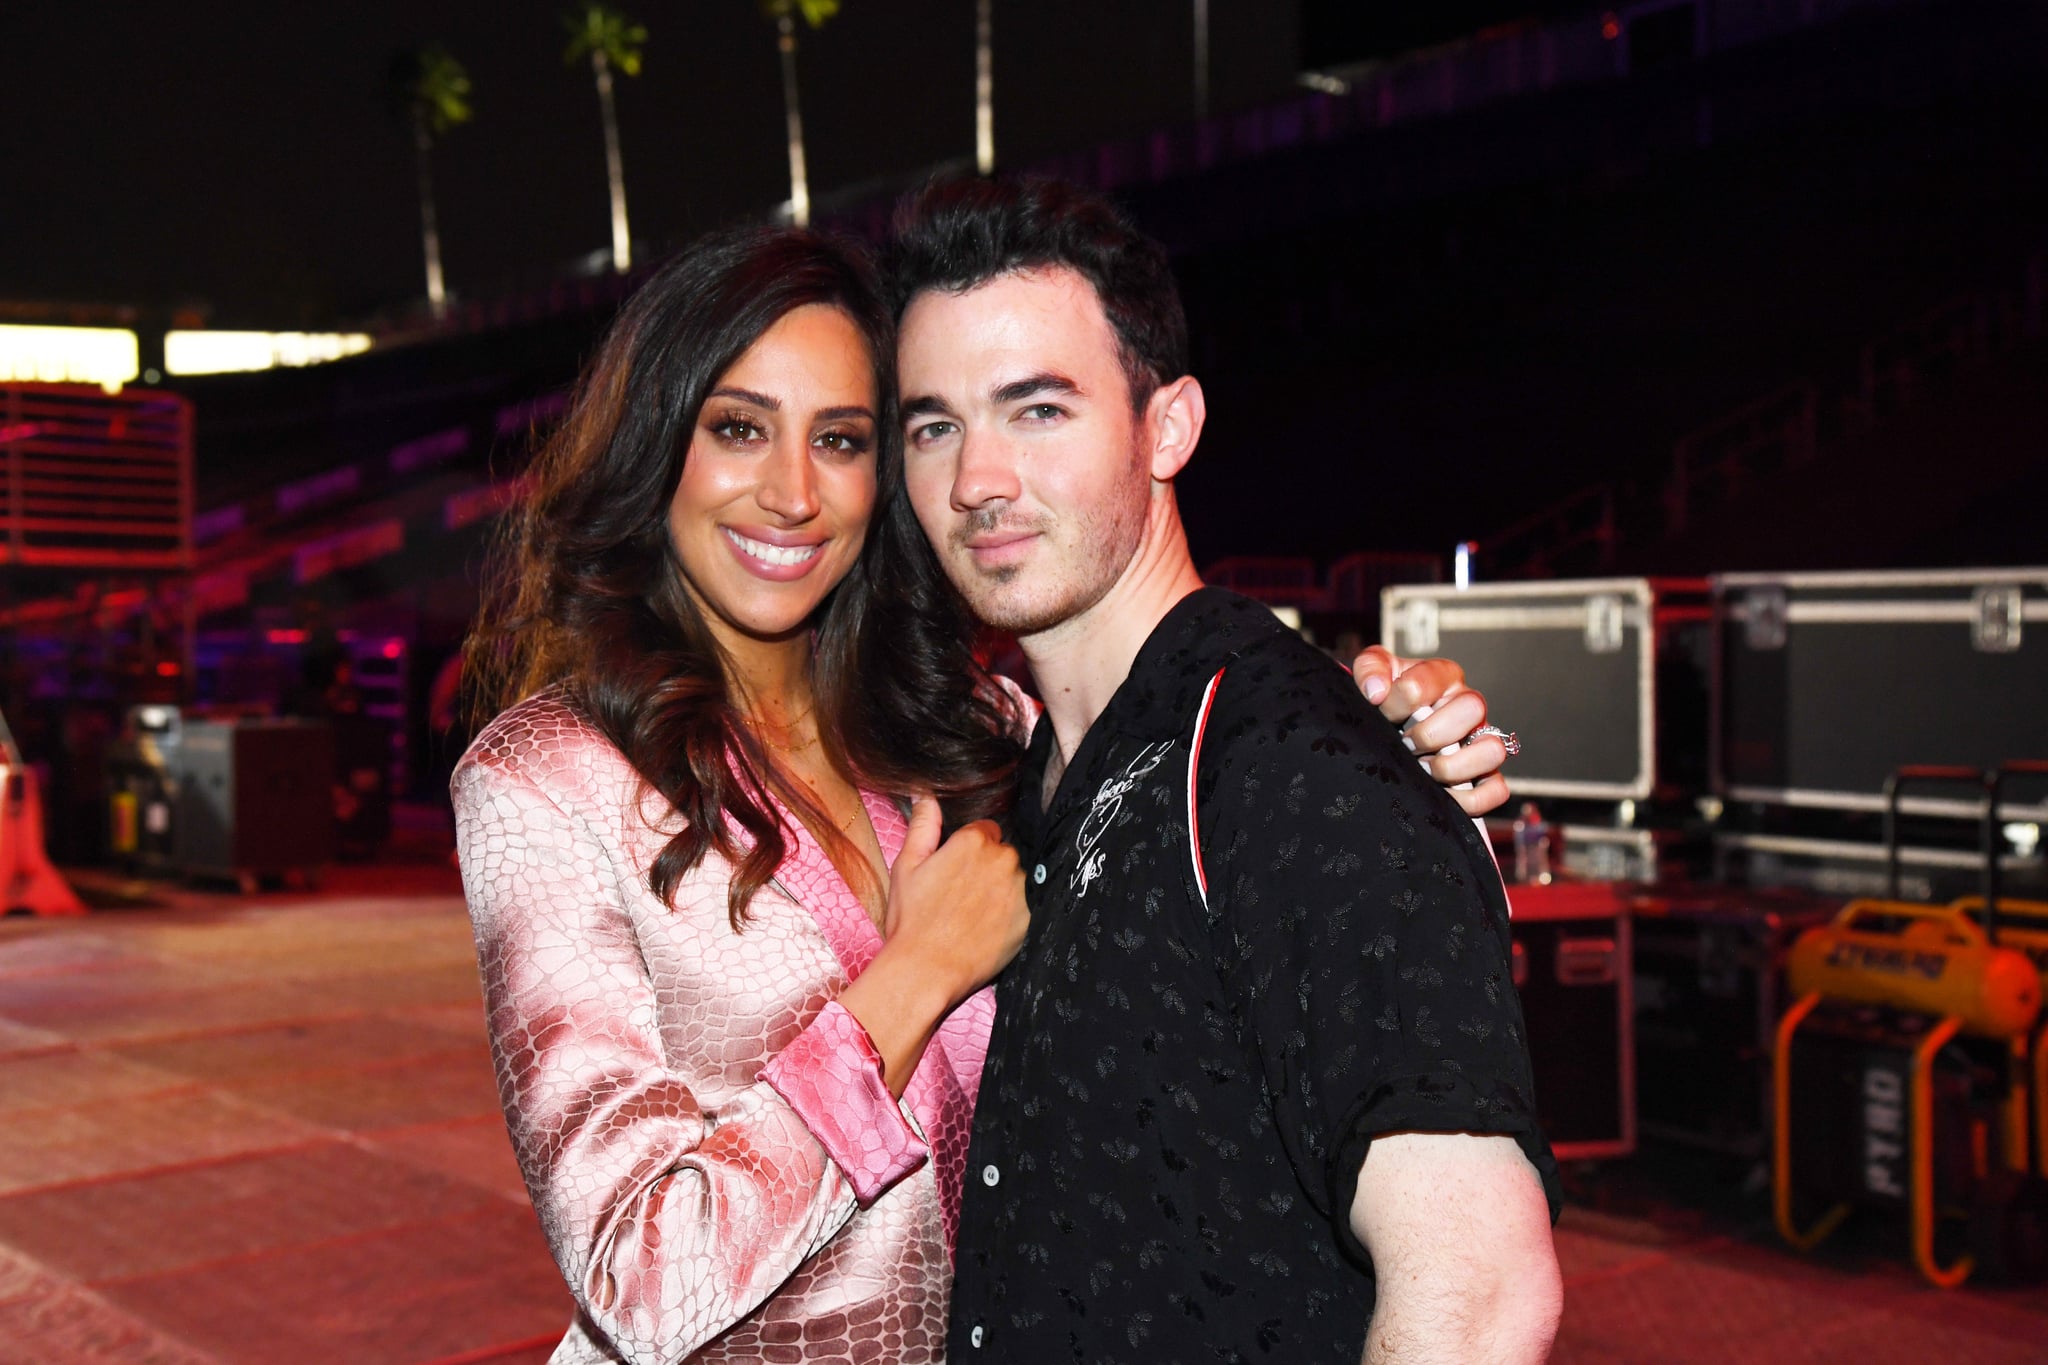 CARSON, CALIFORNIA - JUNE 01: (EDITORIAL USE ONLY. NO COMMERCIAL USE) (L-R) Danielle Jonas and Kevin Jonas pose backstage during the 2019 iHeartRadio Wango Tango presented by The JUVÉDERM® Collection of Dermal Fillers at Dignity Health Sports Park on June 01, 2019 in Carson, California. (Photo by Kevin Mazur/Getty Images for iHeartMedia)